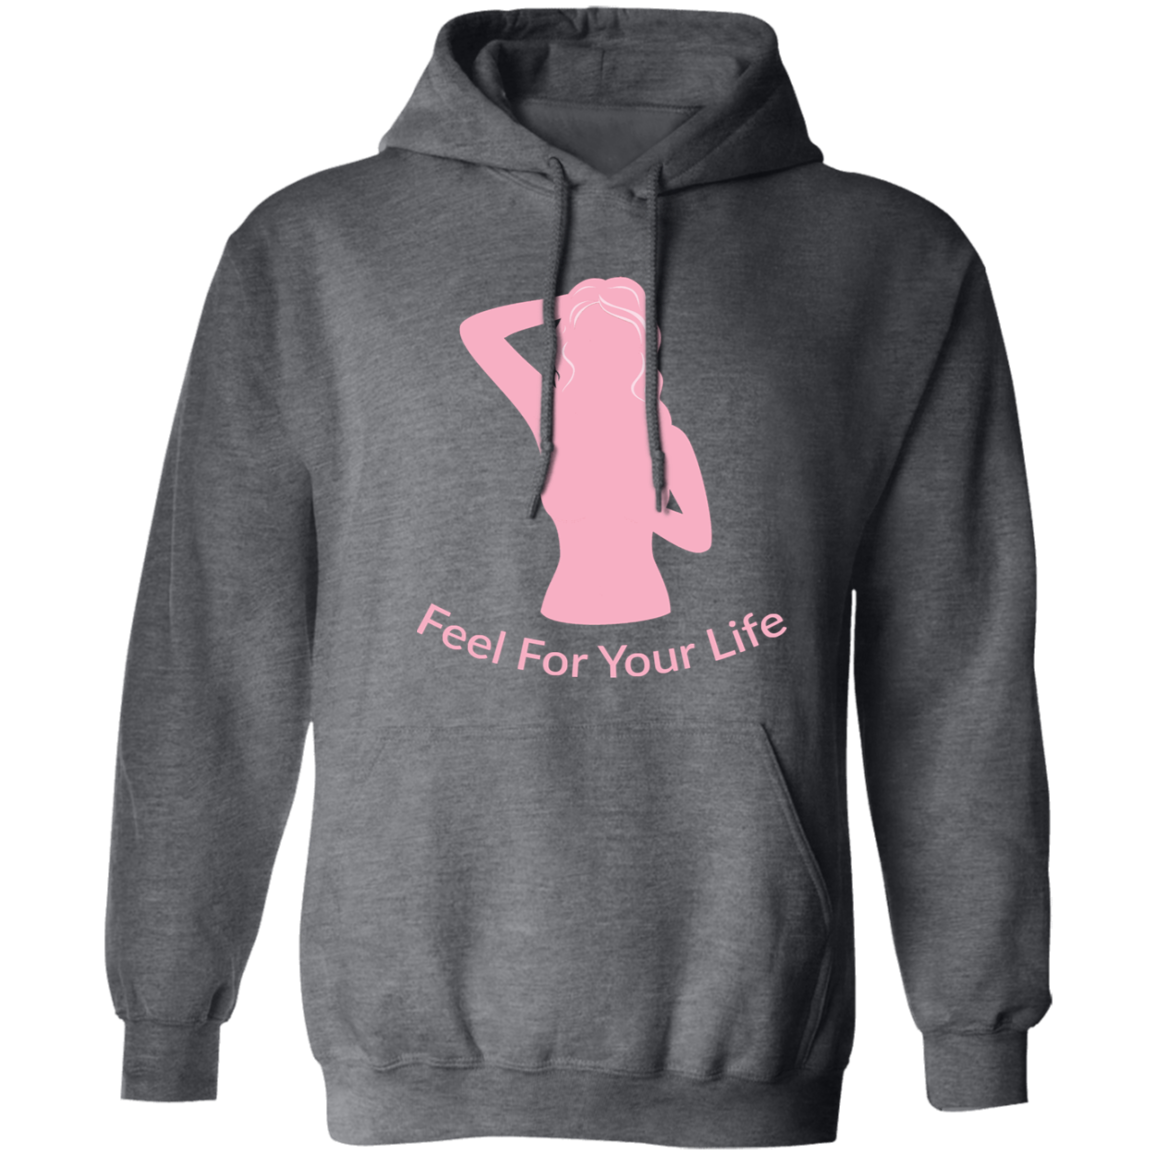 Feel For Your Life Unisex Hoodie Light Gray w/ Light Pink Logo Large